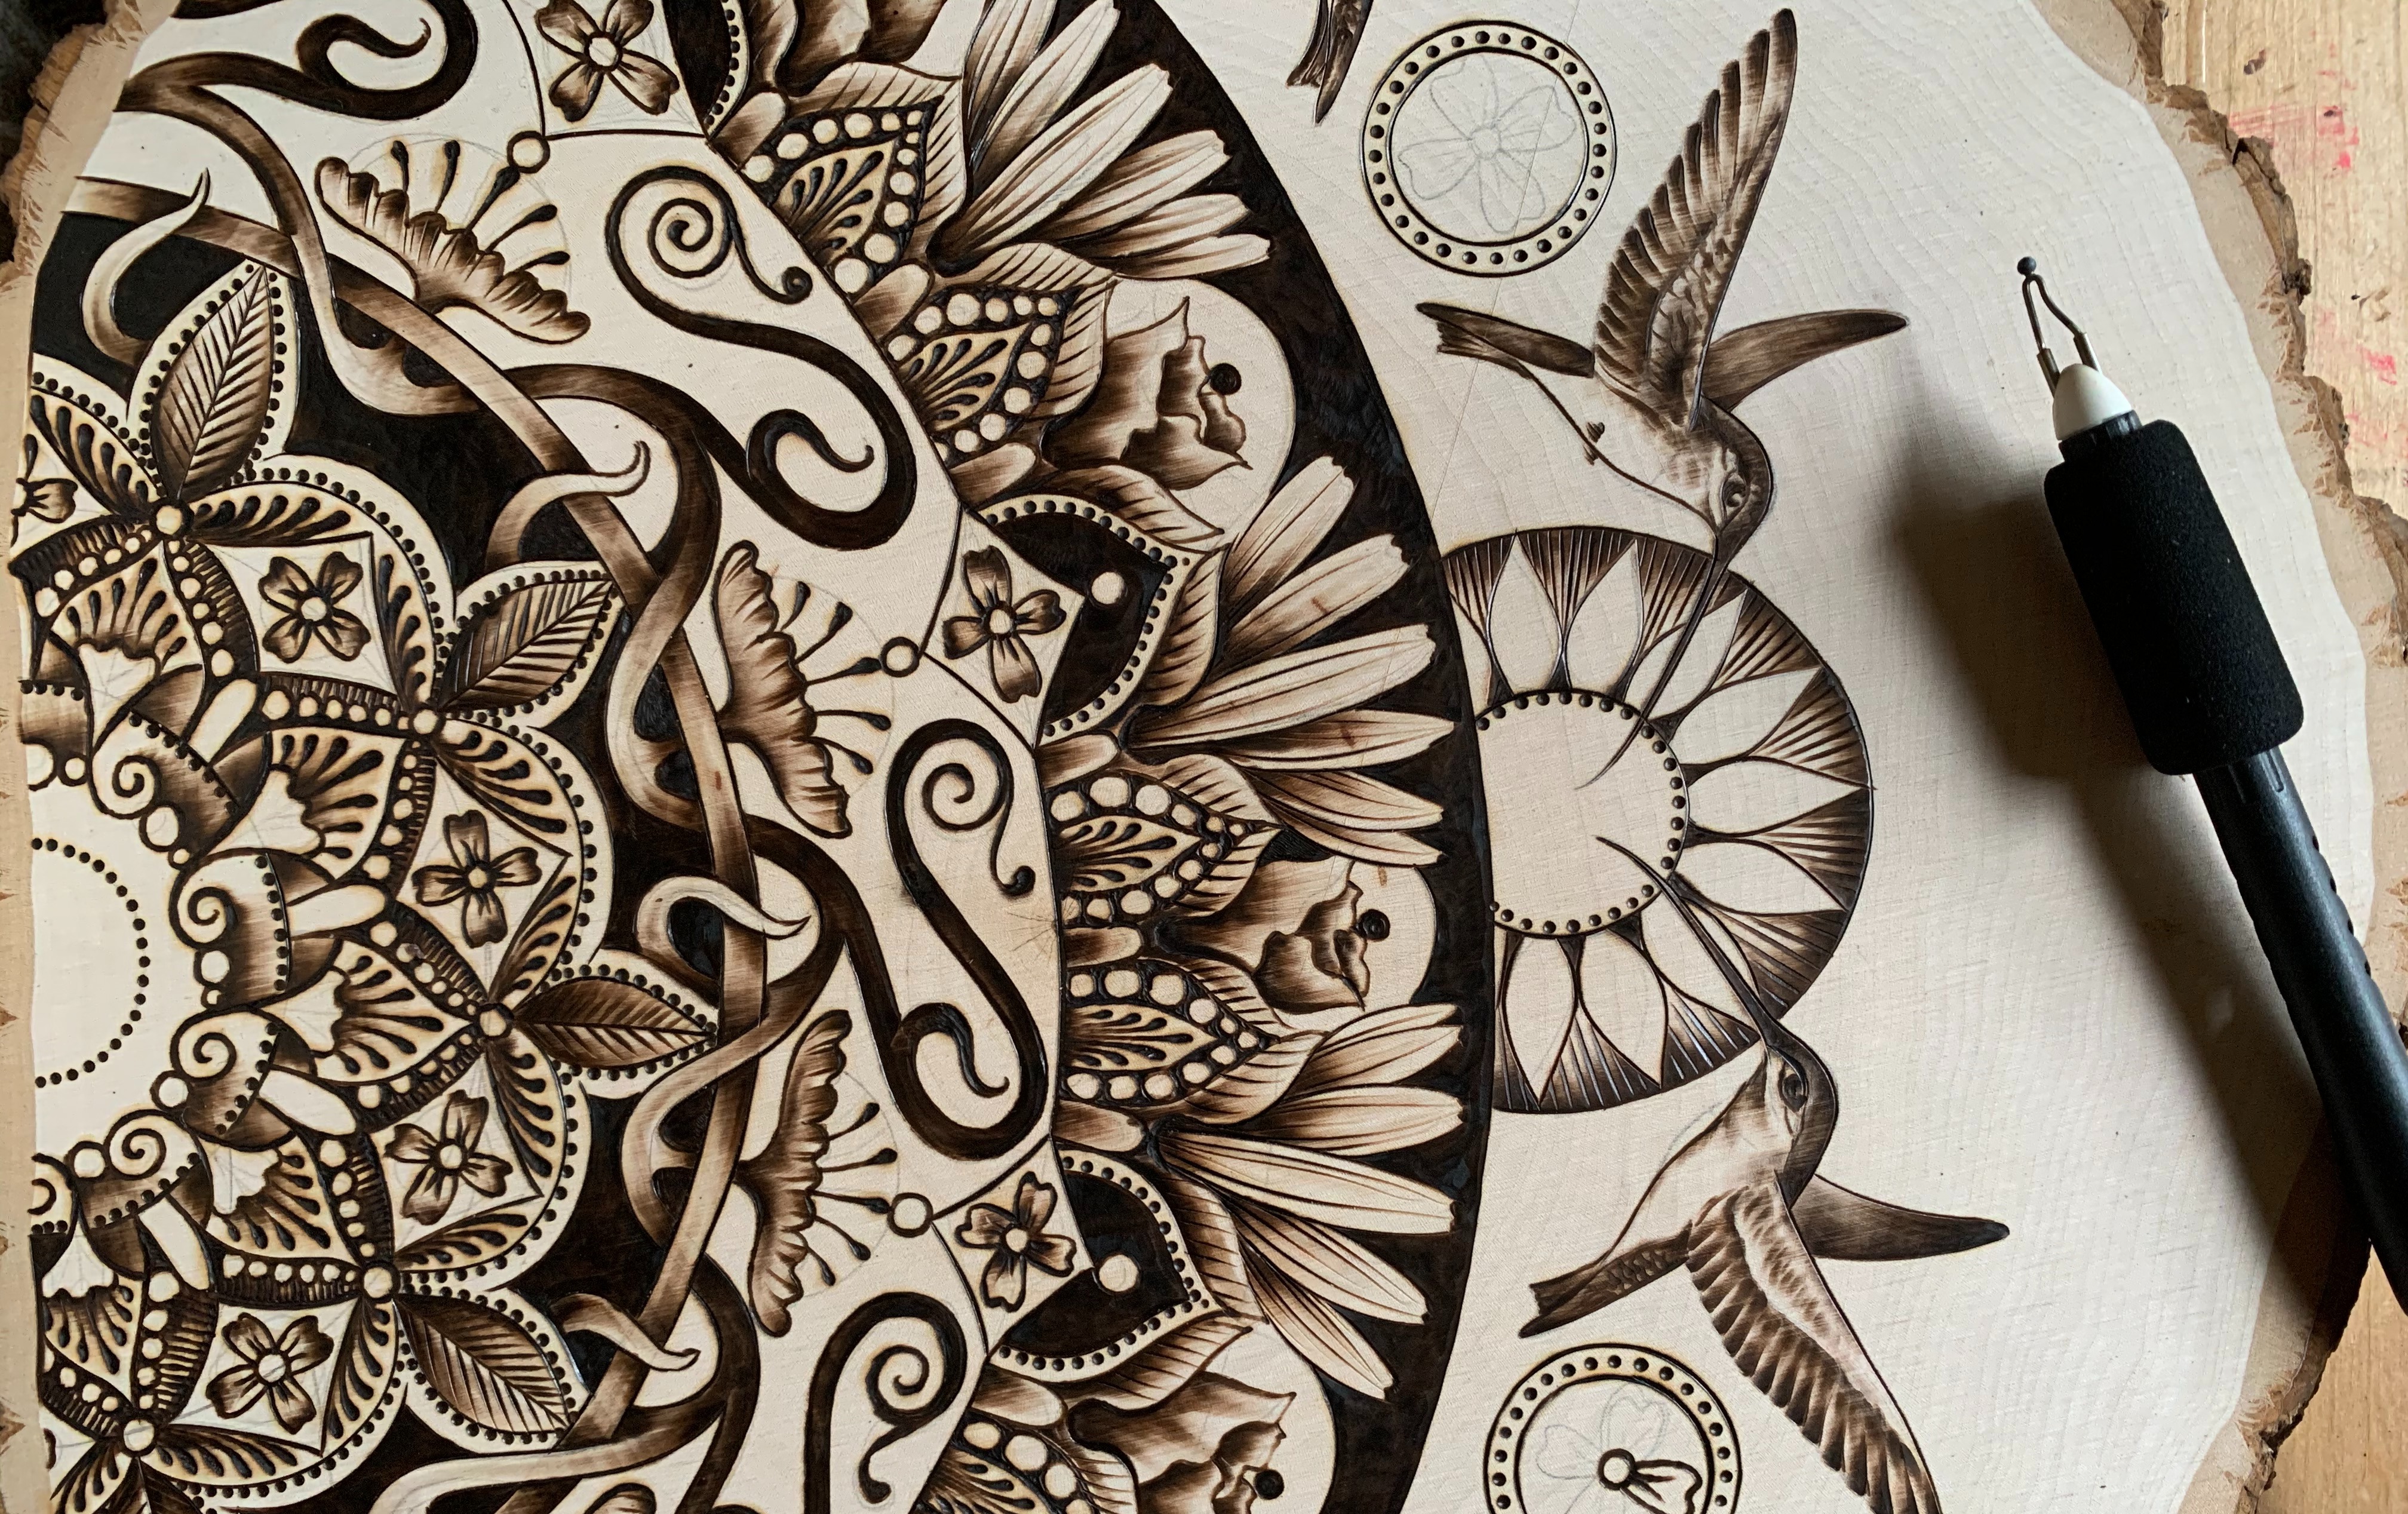 The magic of pyrography: tools for wood burning art